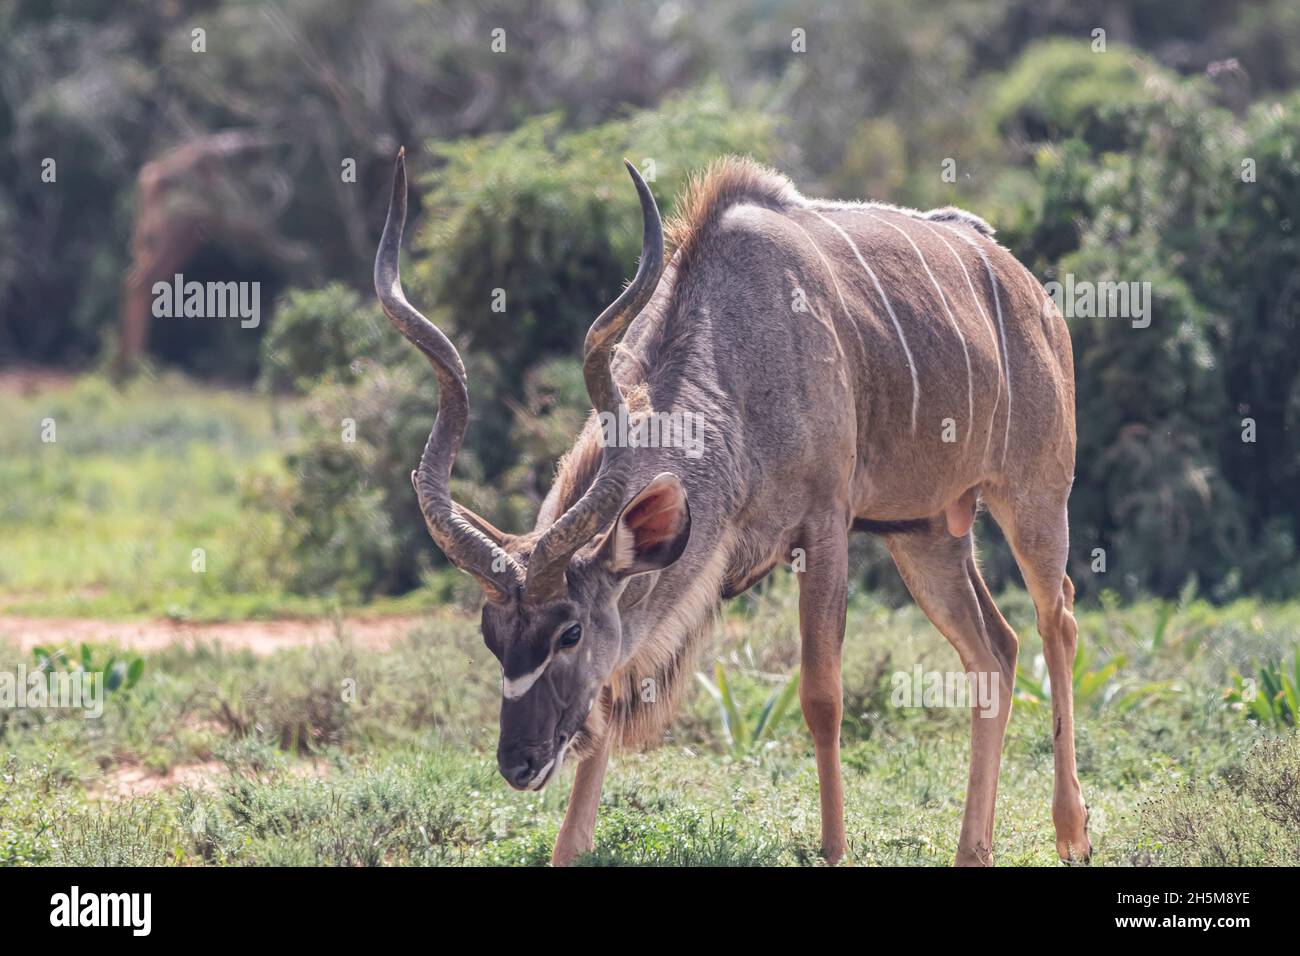 A male greater kudu (Tragelaphus strepsiceros) grazing in the bush vegetation at Addo Elephant National Park, South Africa. Stock Photo